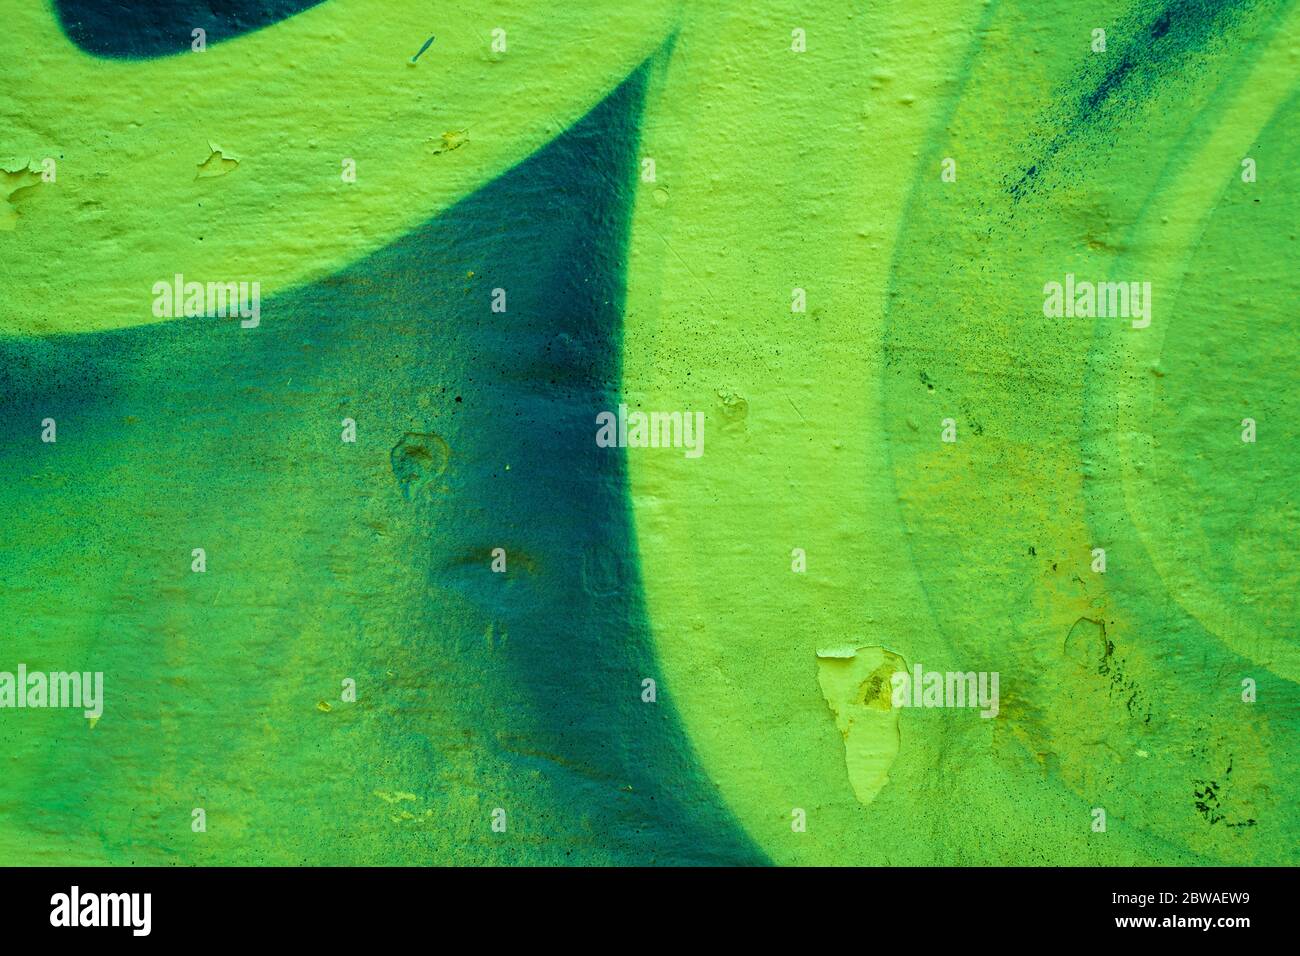 Green abstract gradient paint on a colorful wall. Close-up of a graffiti texture. Street art background. Stock Photo